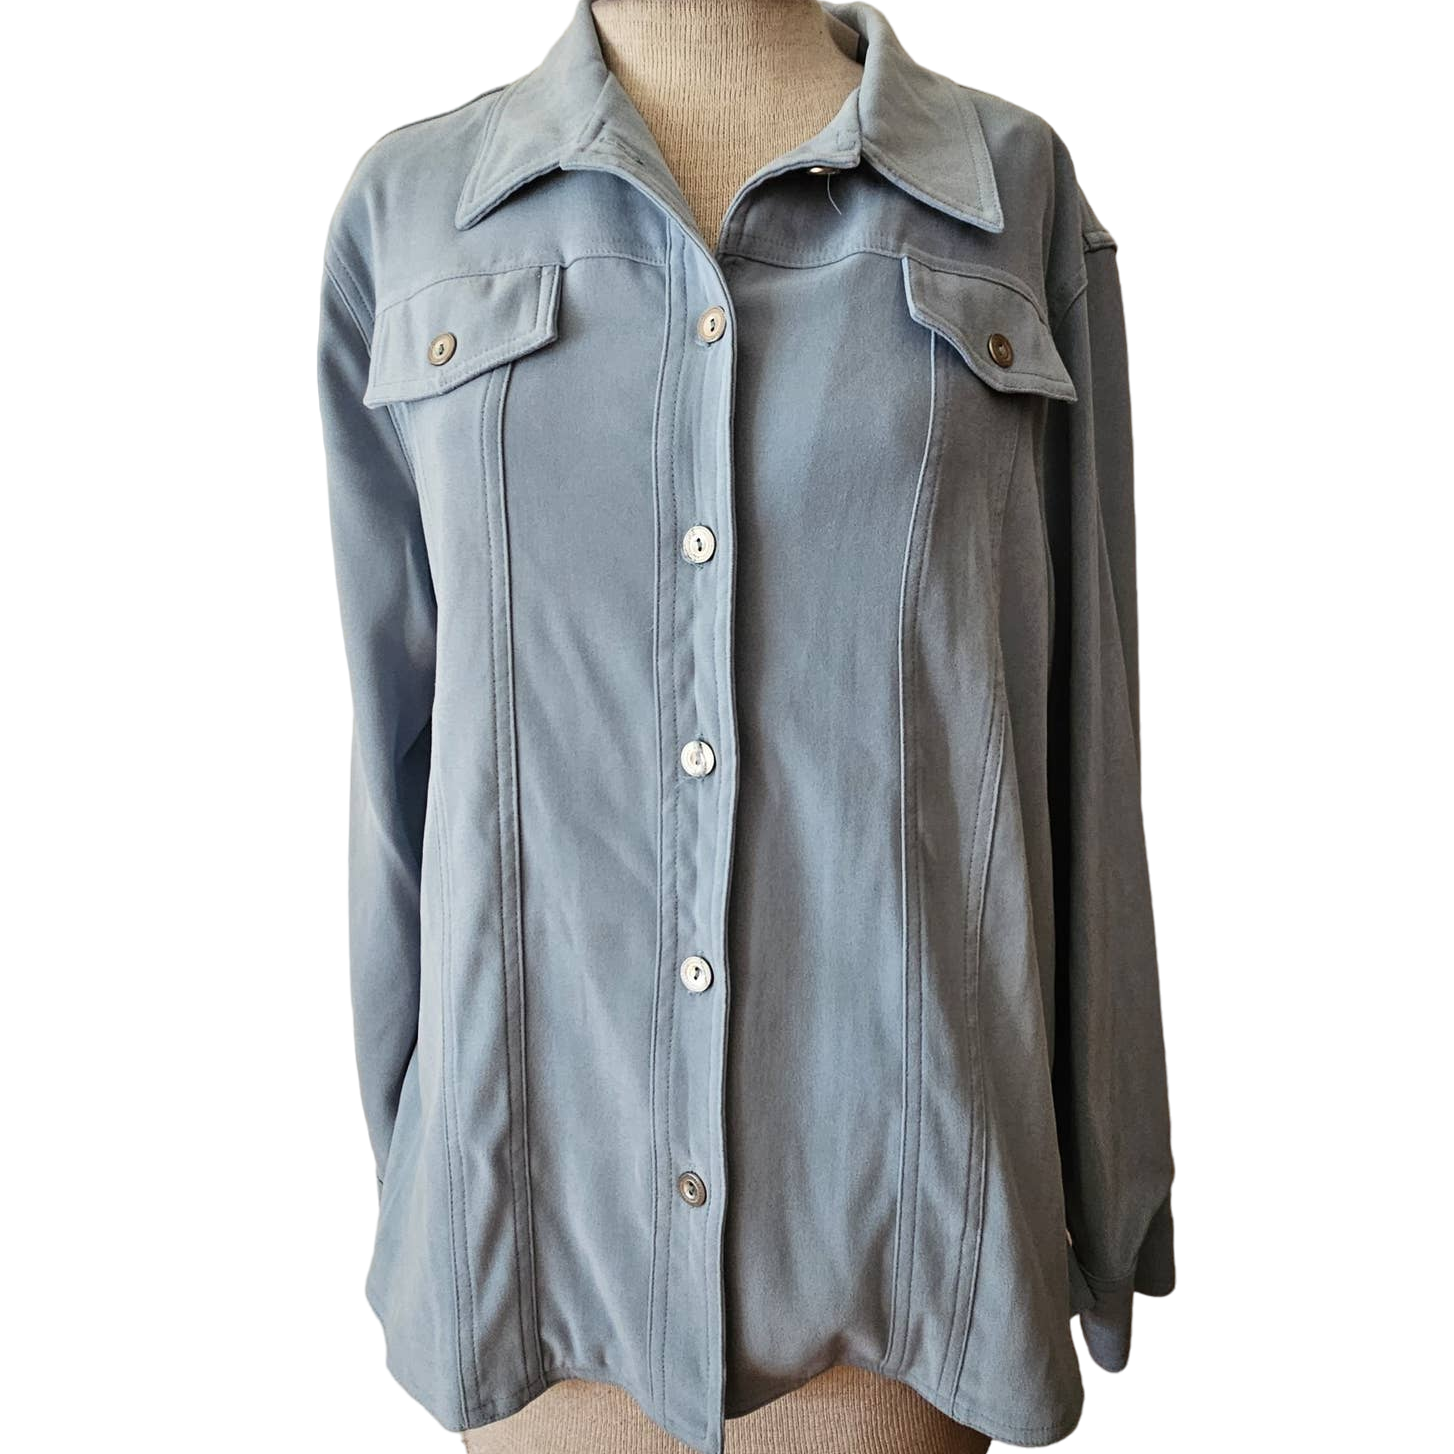 Primary image for Light Blue Shacket Size 12